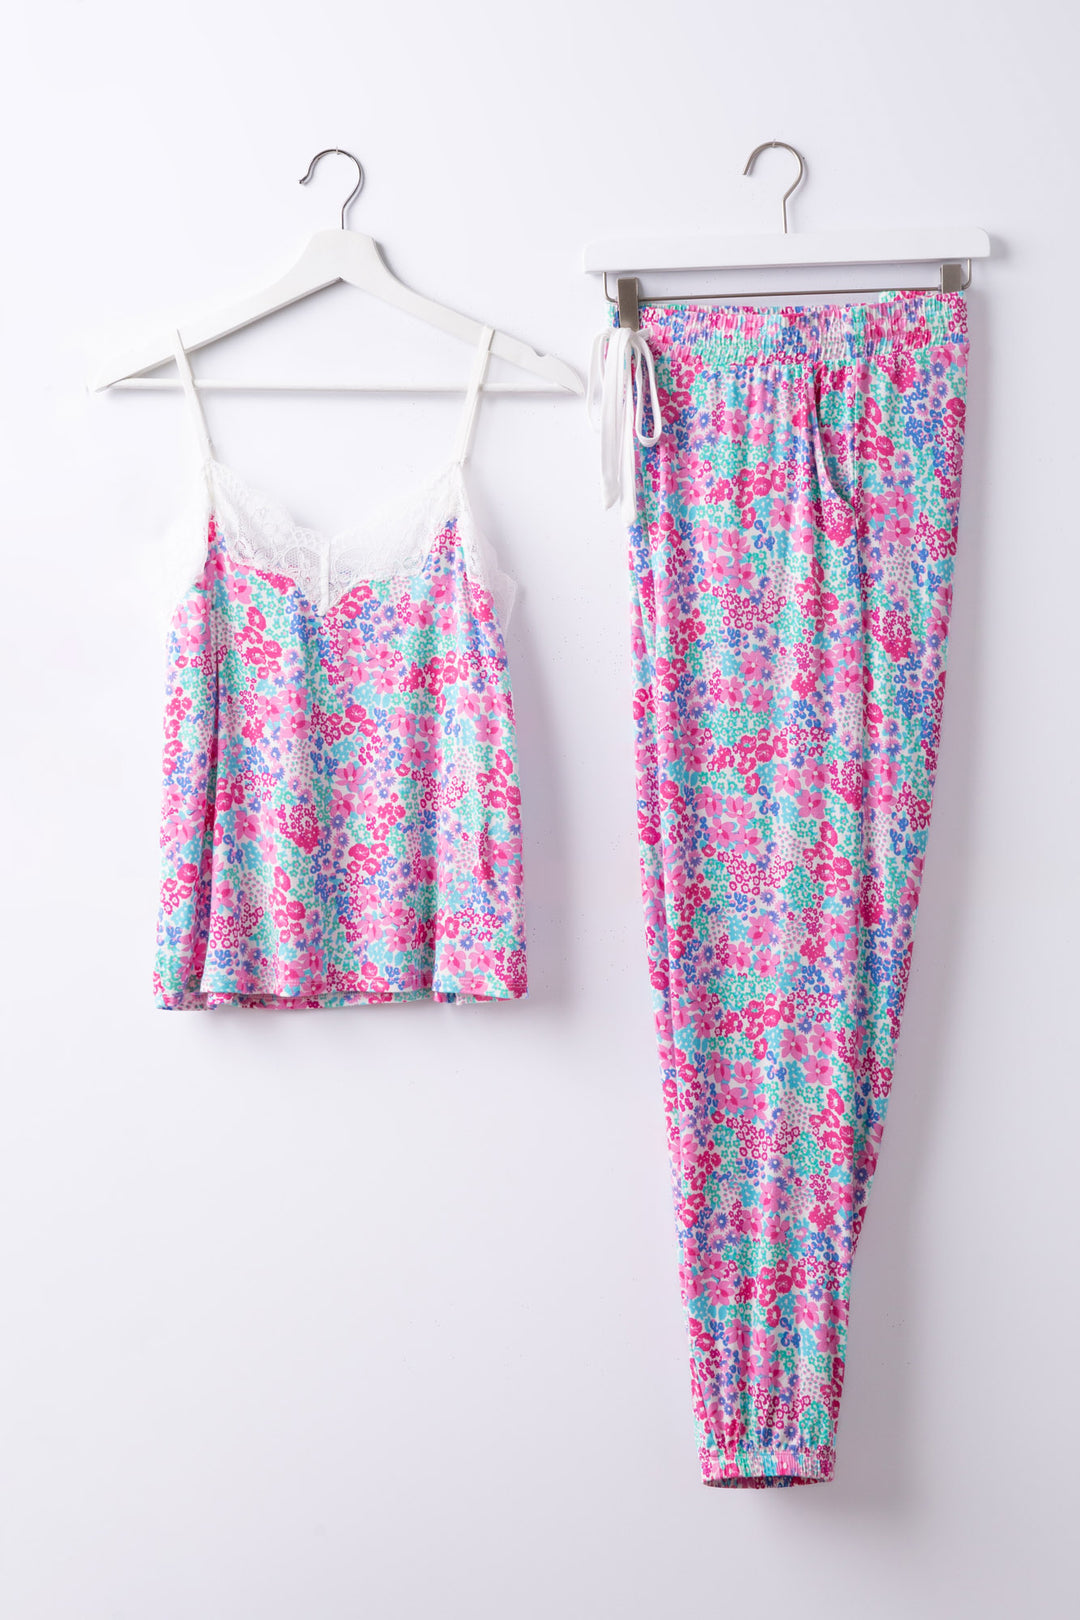 Mini floral print modal cami + jogger sleep set with ivory lace neckline. Exclusive collab design x Ramy Brook.